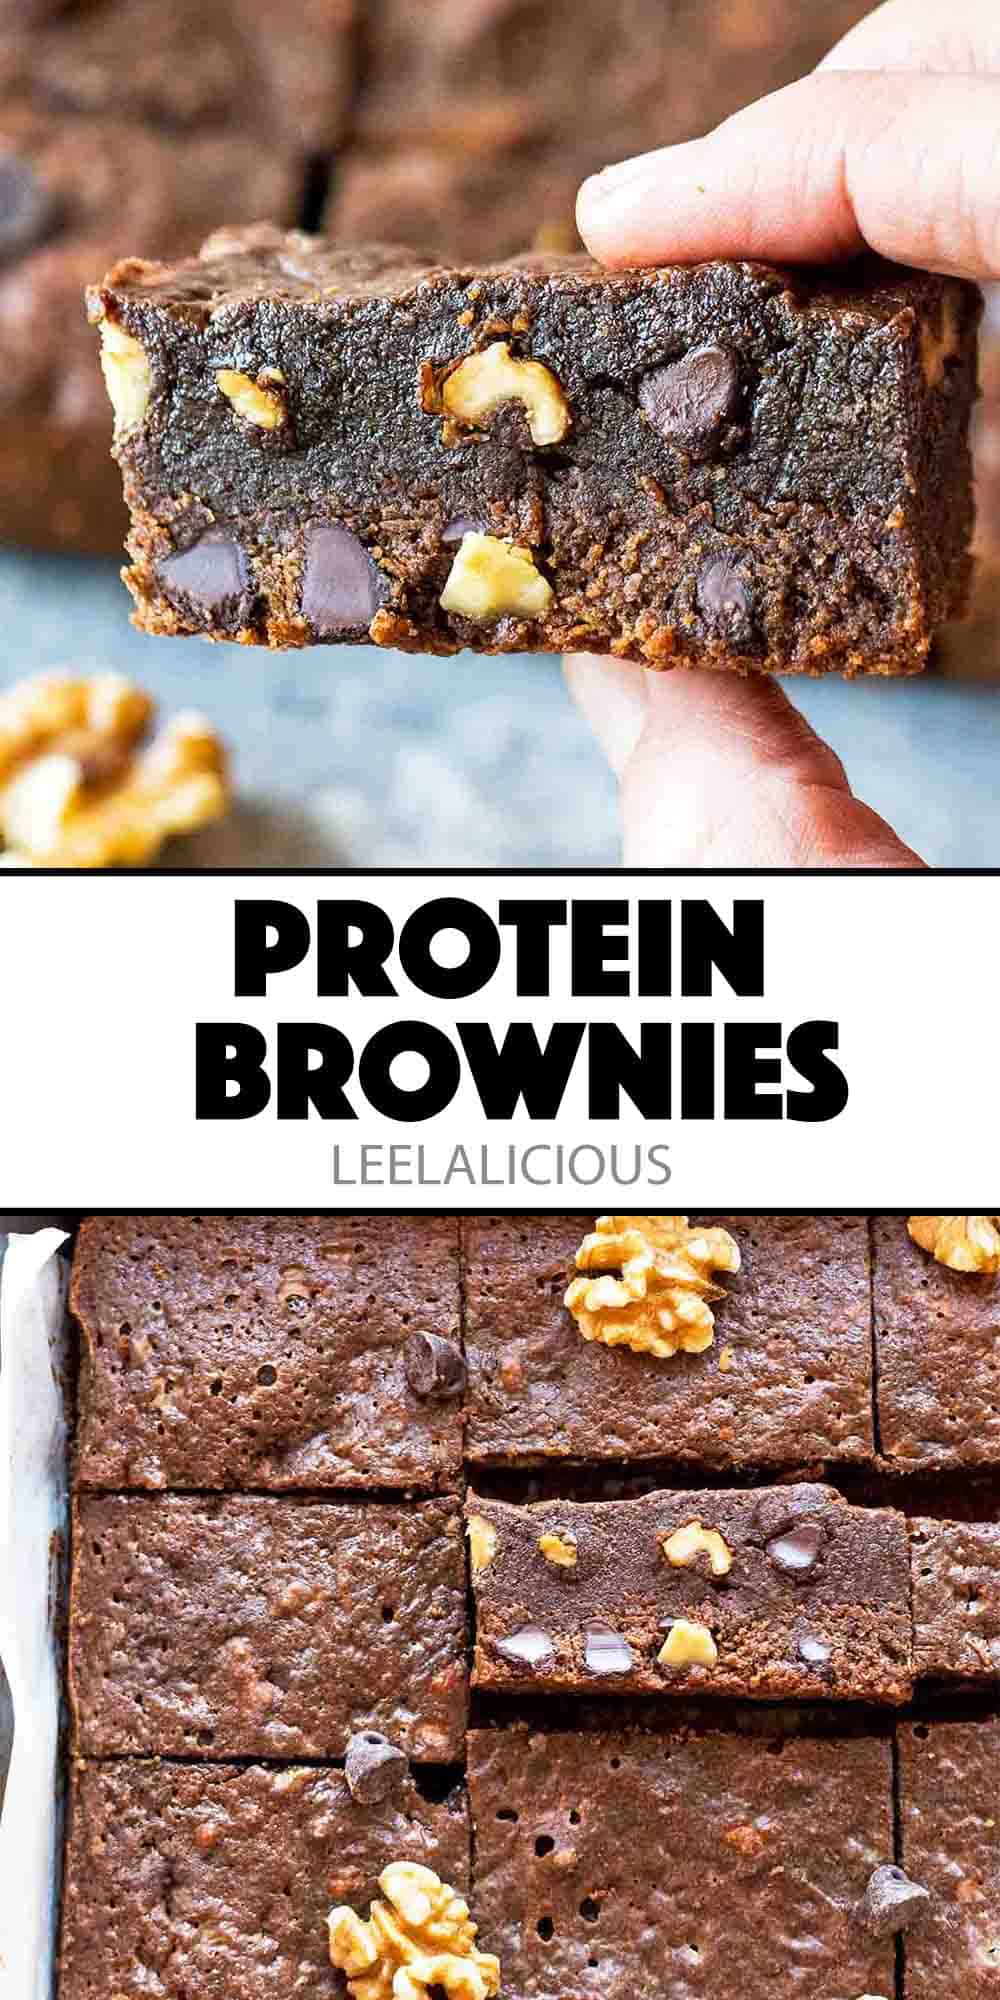 Chocolate protein brownies with nuts